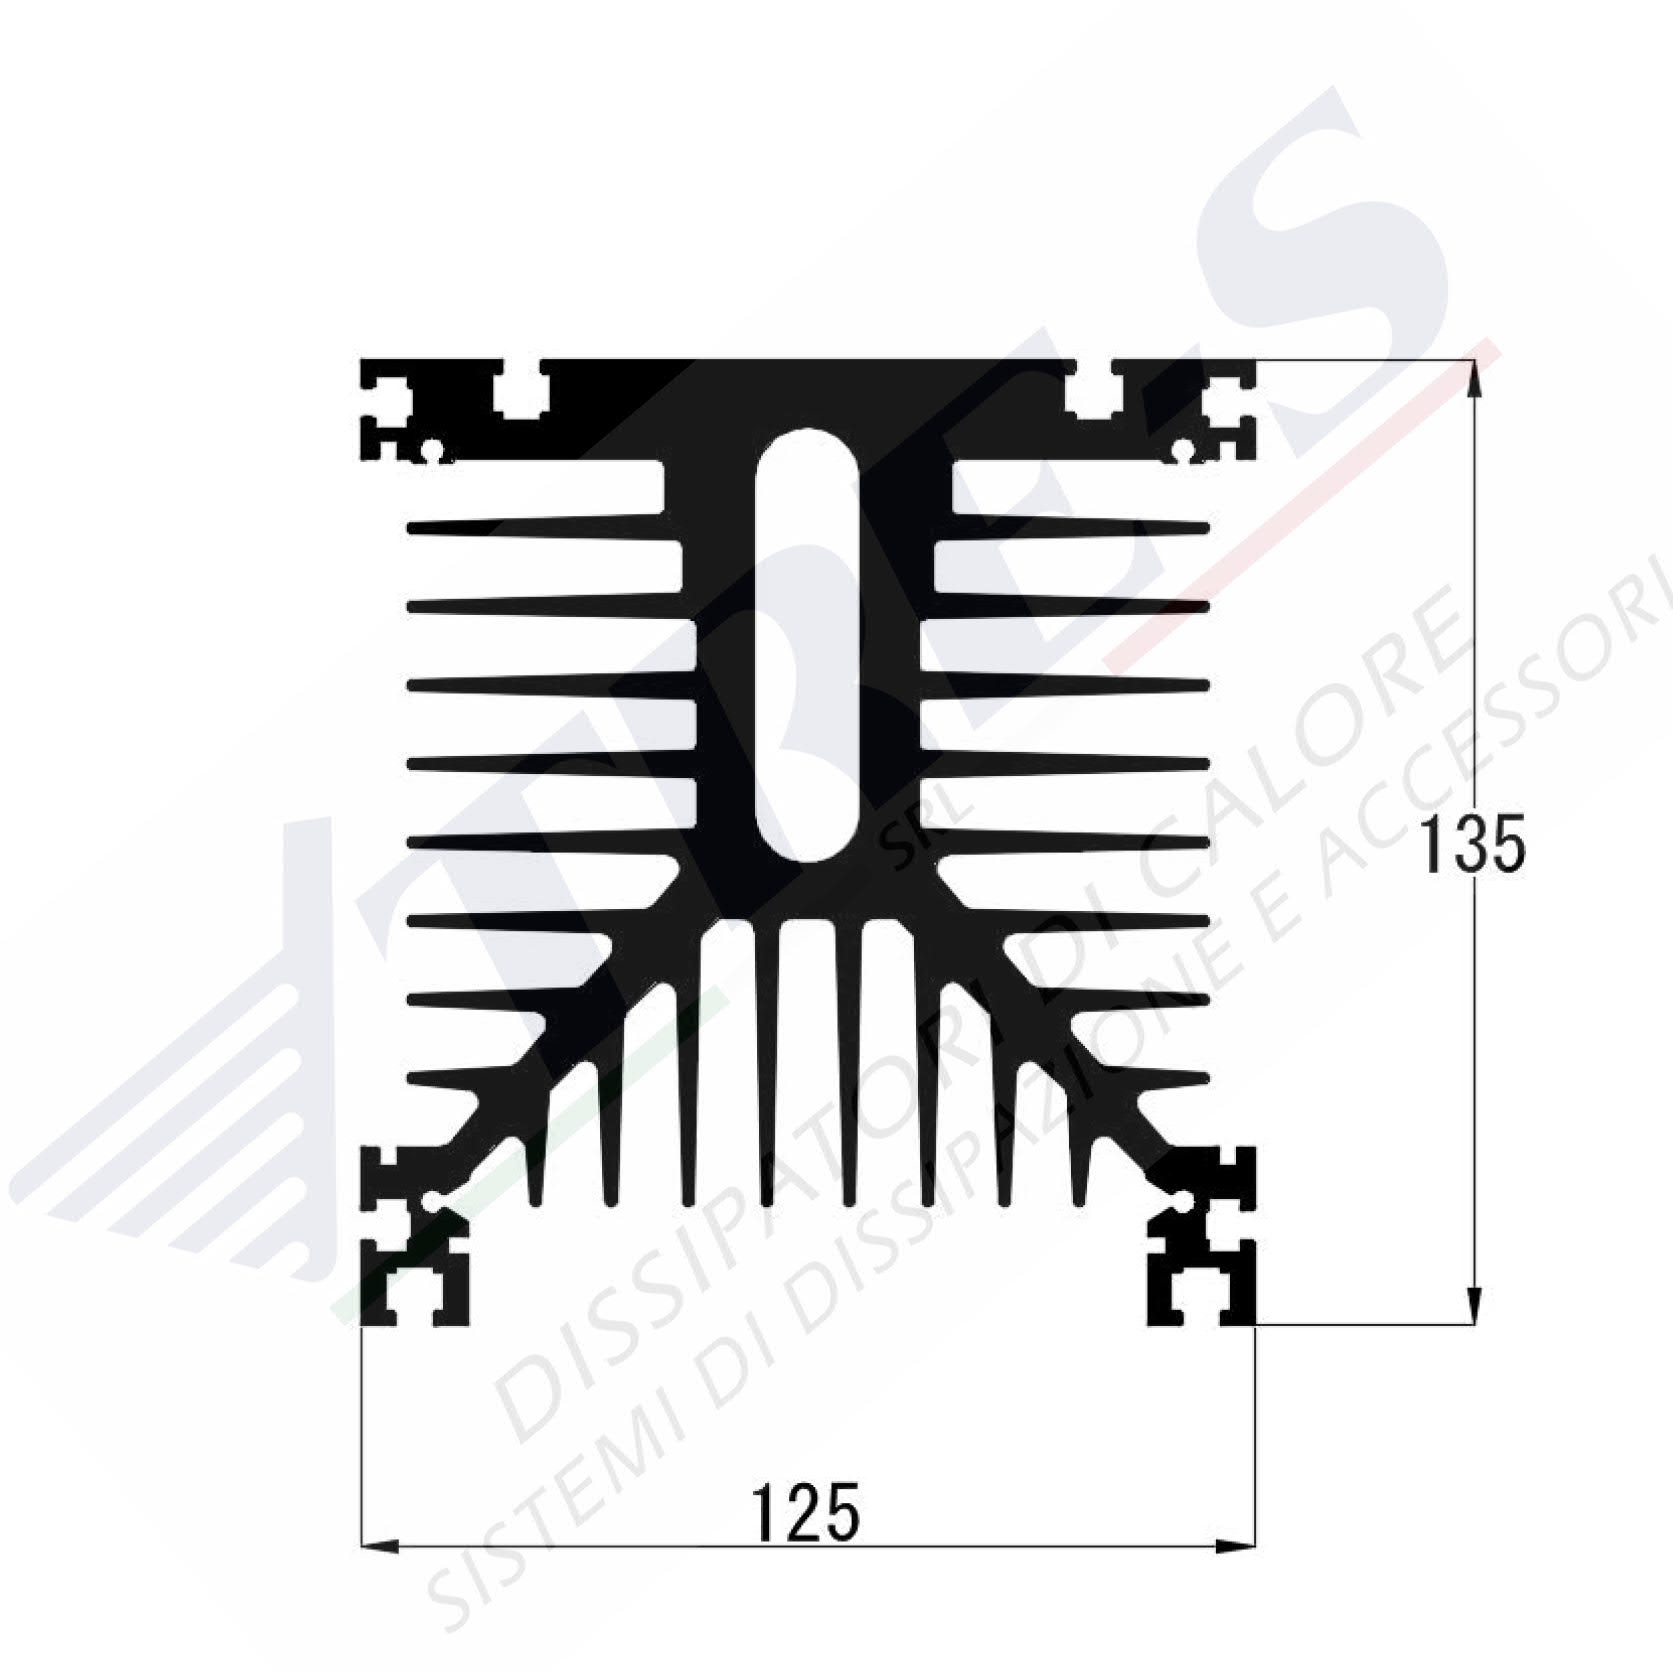 PRO1125L - Profiles for devices with screw connections